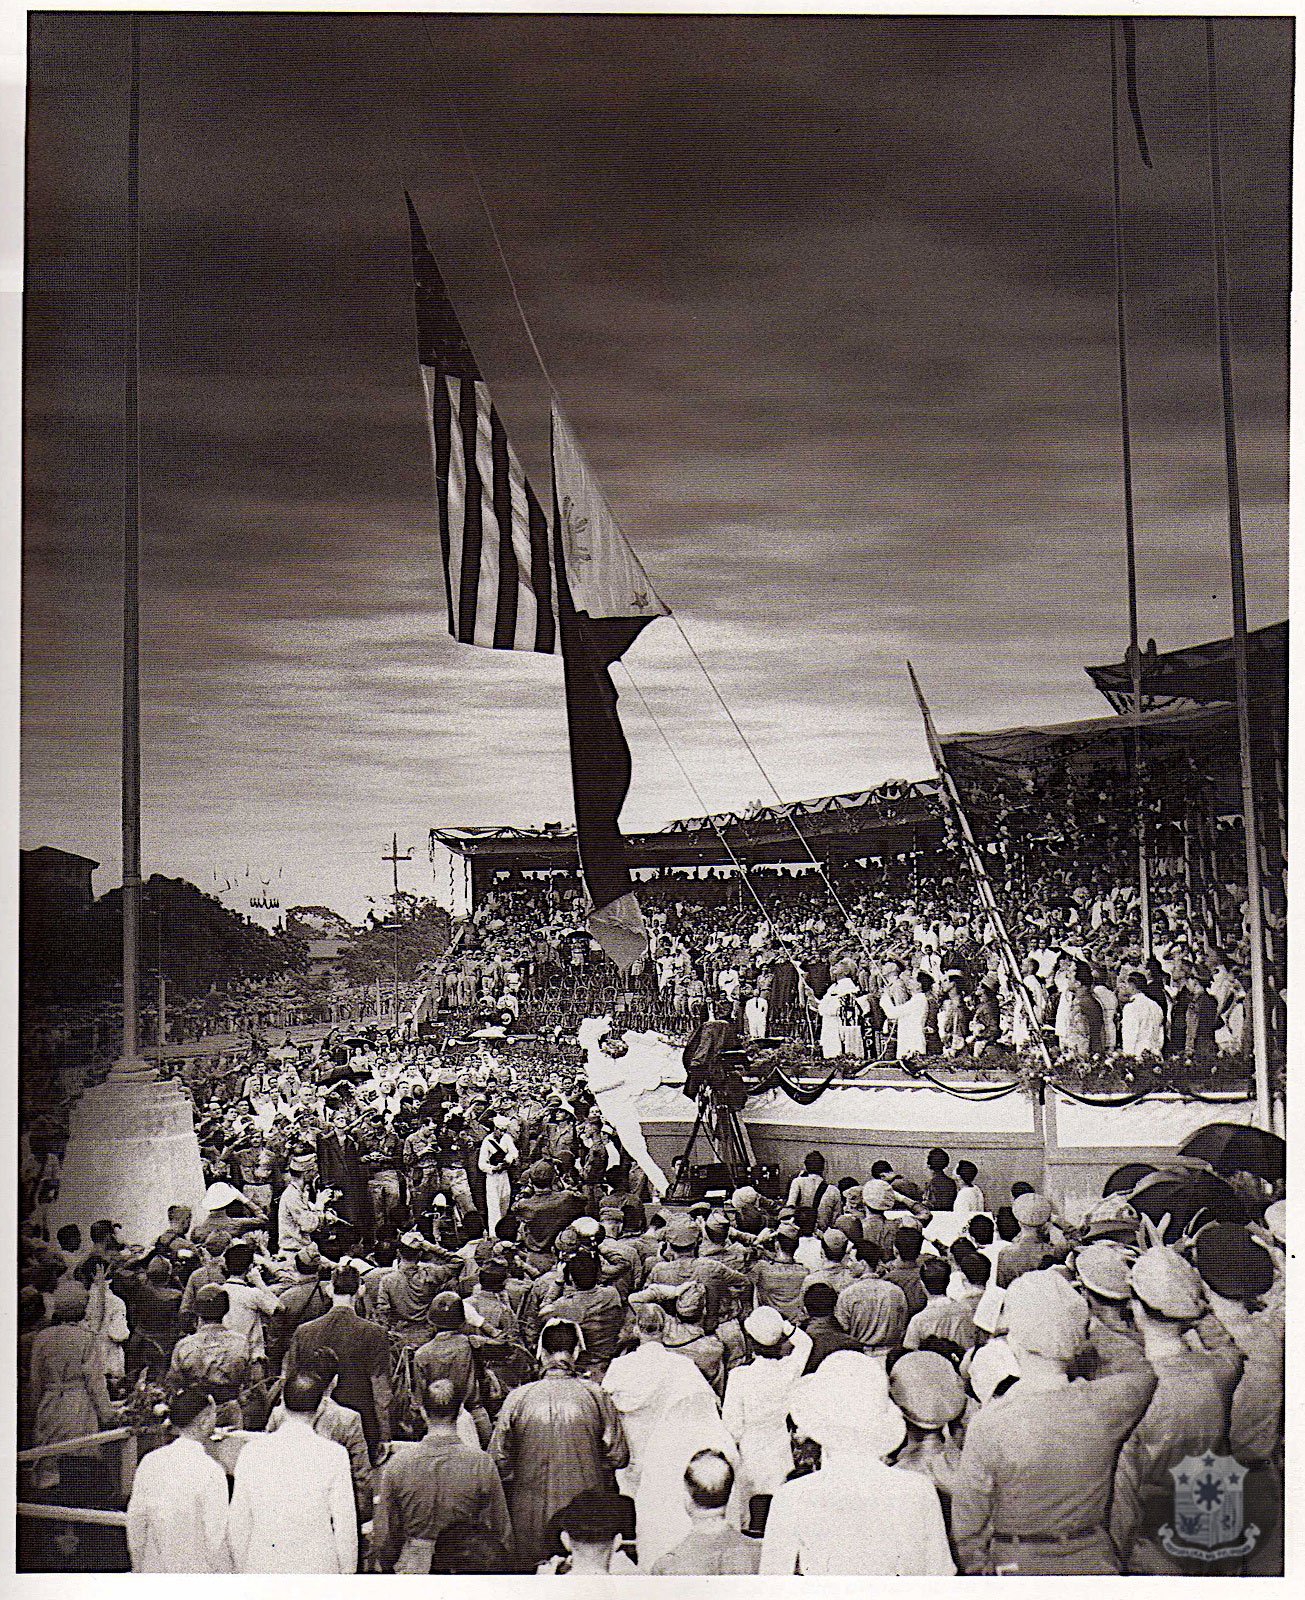 Philippine-flag-is-raised-while-the-U.S.-flag-is-lowered